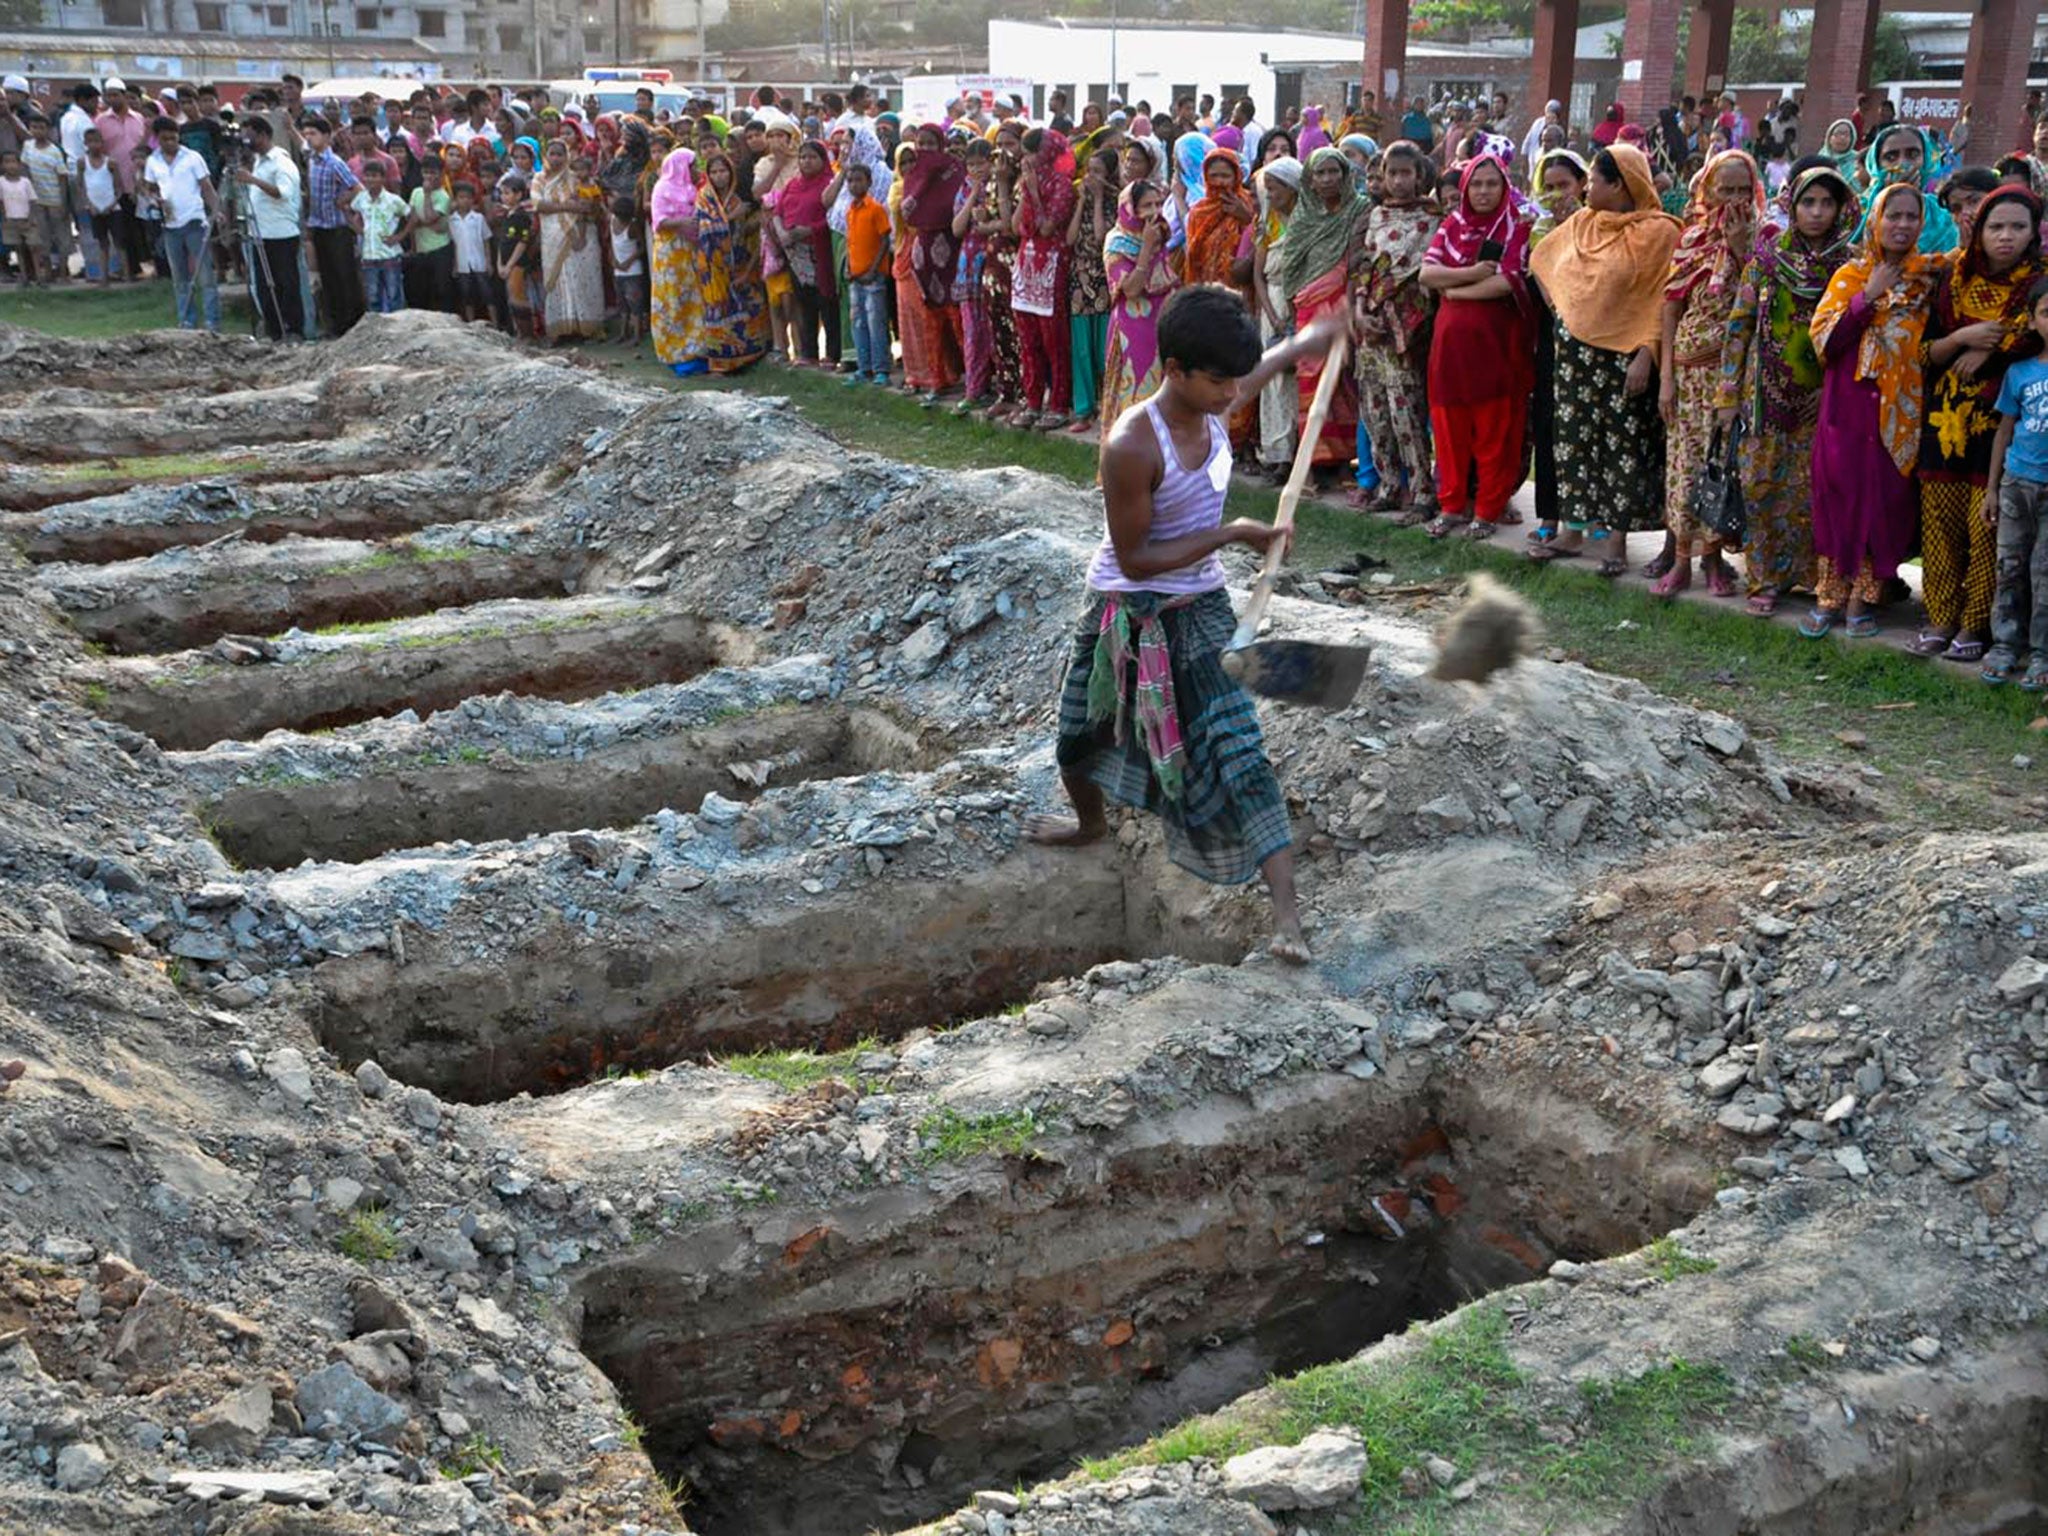 Authorities arrange the burial of many workers in a Dhaka graveyard as their identities could not be known to hand over the bodies © Indraji Ghosh